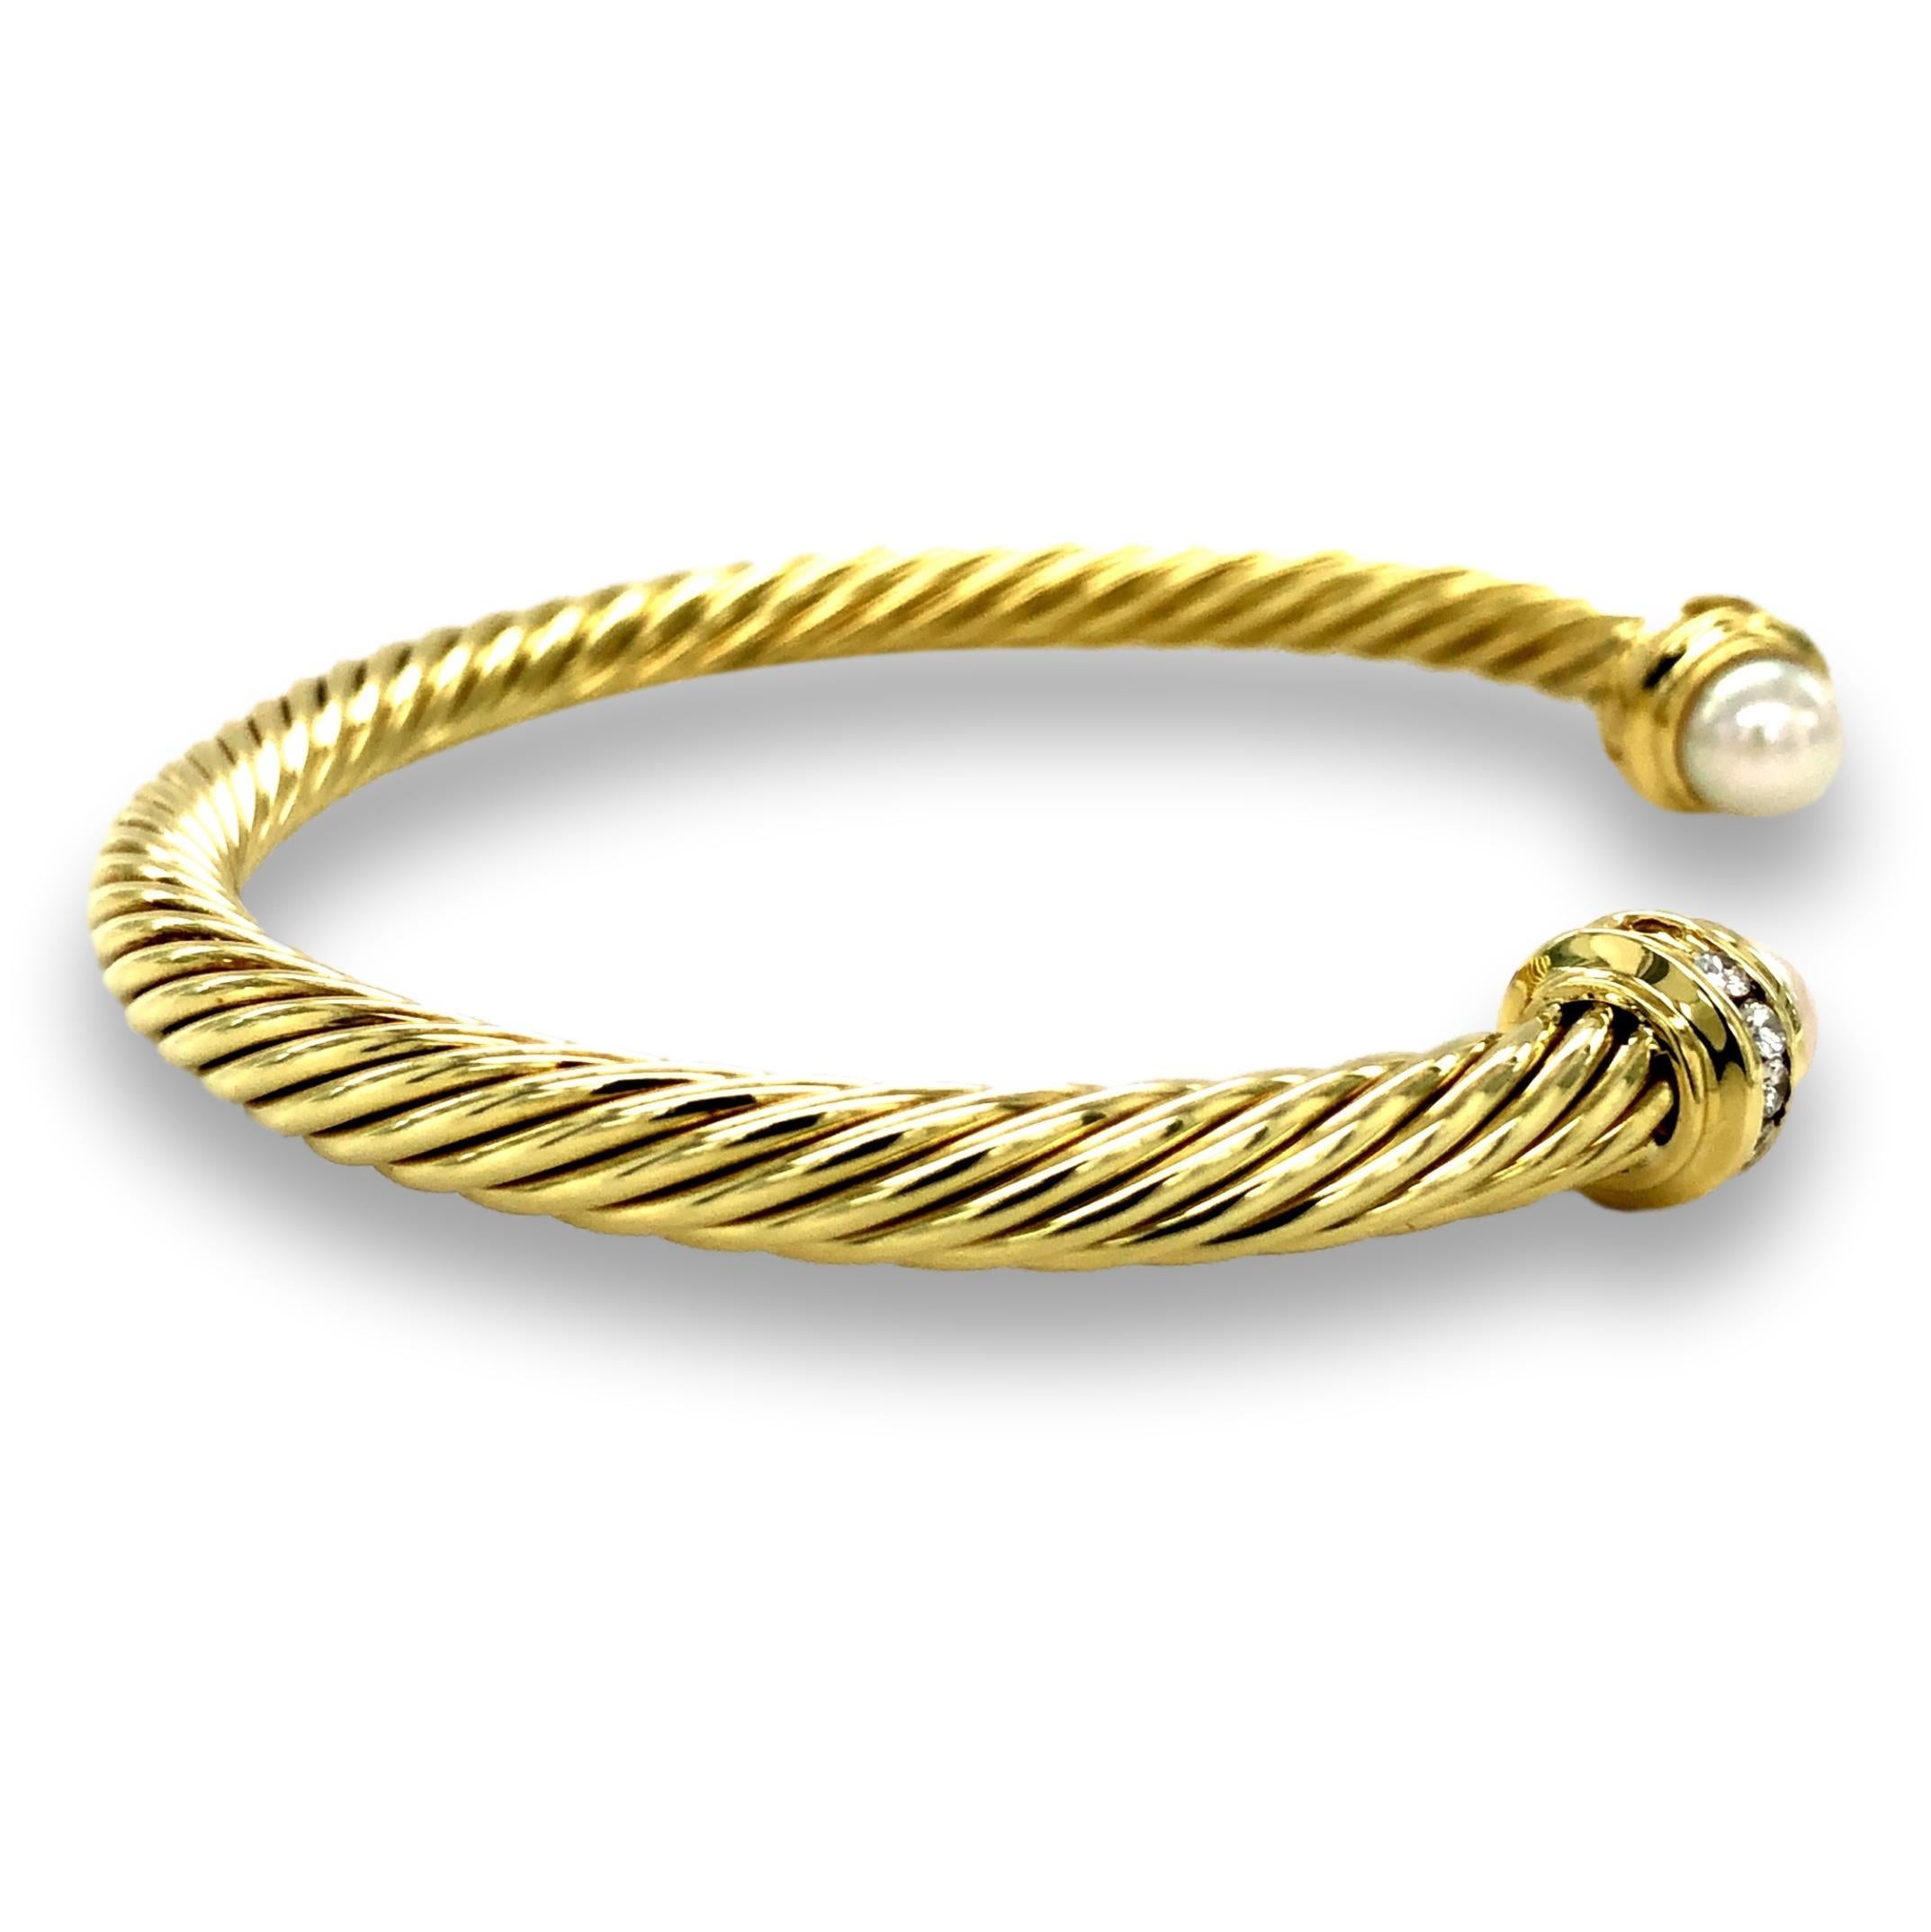 David Yurman open bangle bracelet from the cable collection finely crafted in 18 karat yellow gold featuring two cultured freshwater pearls on each side adorned with pave set round brilliant cut diamond details that weigh 0.22 cts total weight